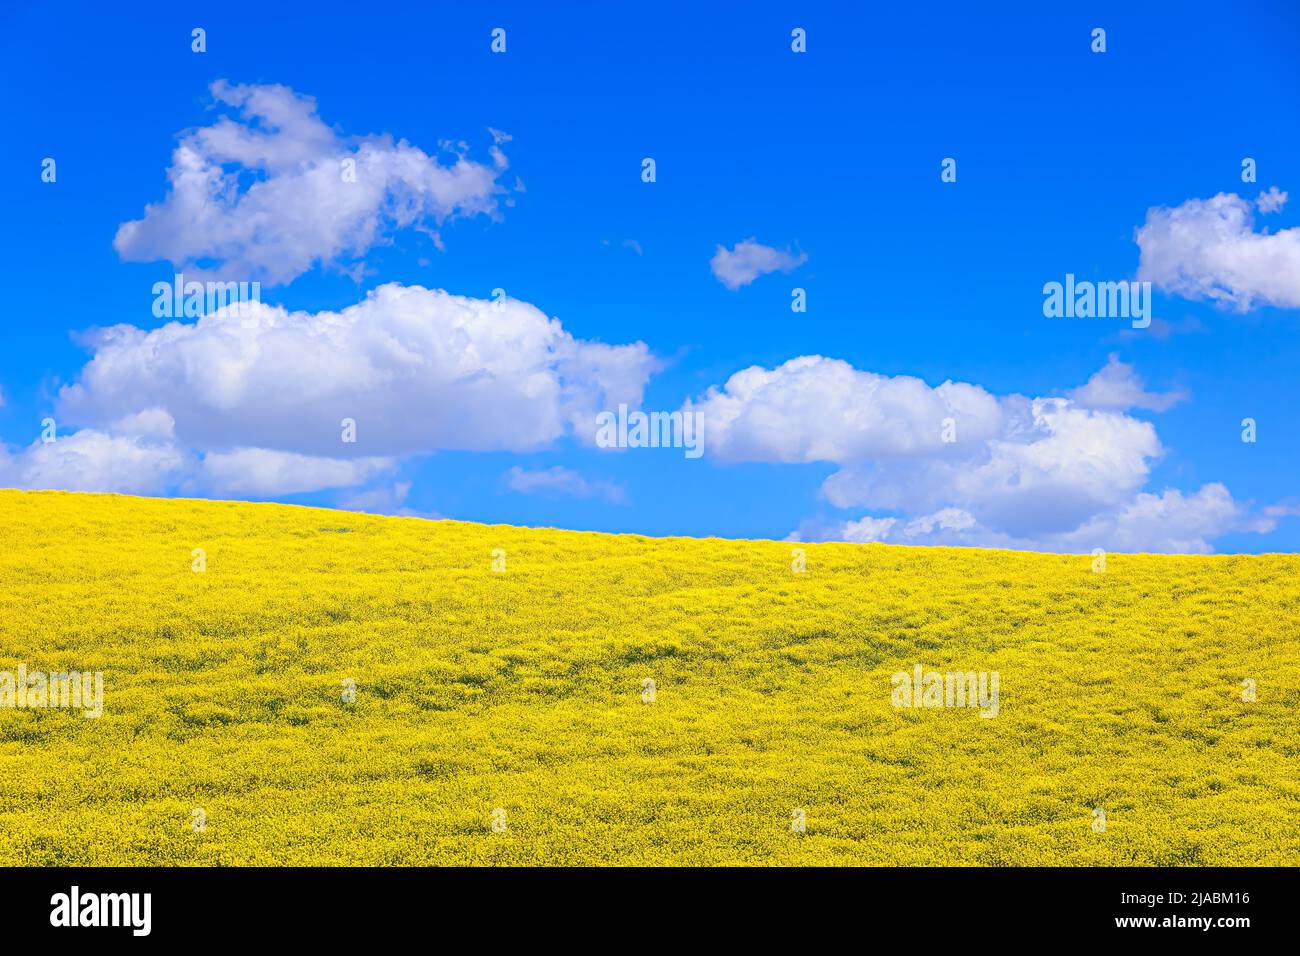 Spring horizon with yellow flowers field under blue sky and clouds, Italy (Apulia).Spring horizon with clouds and flowering fields. Stock Photo